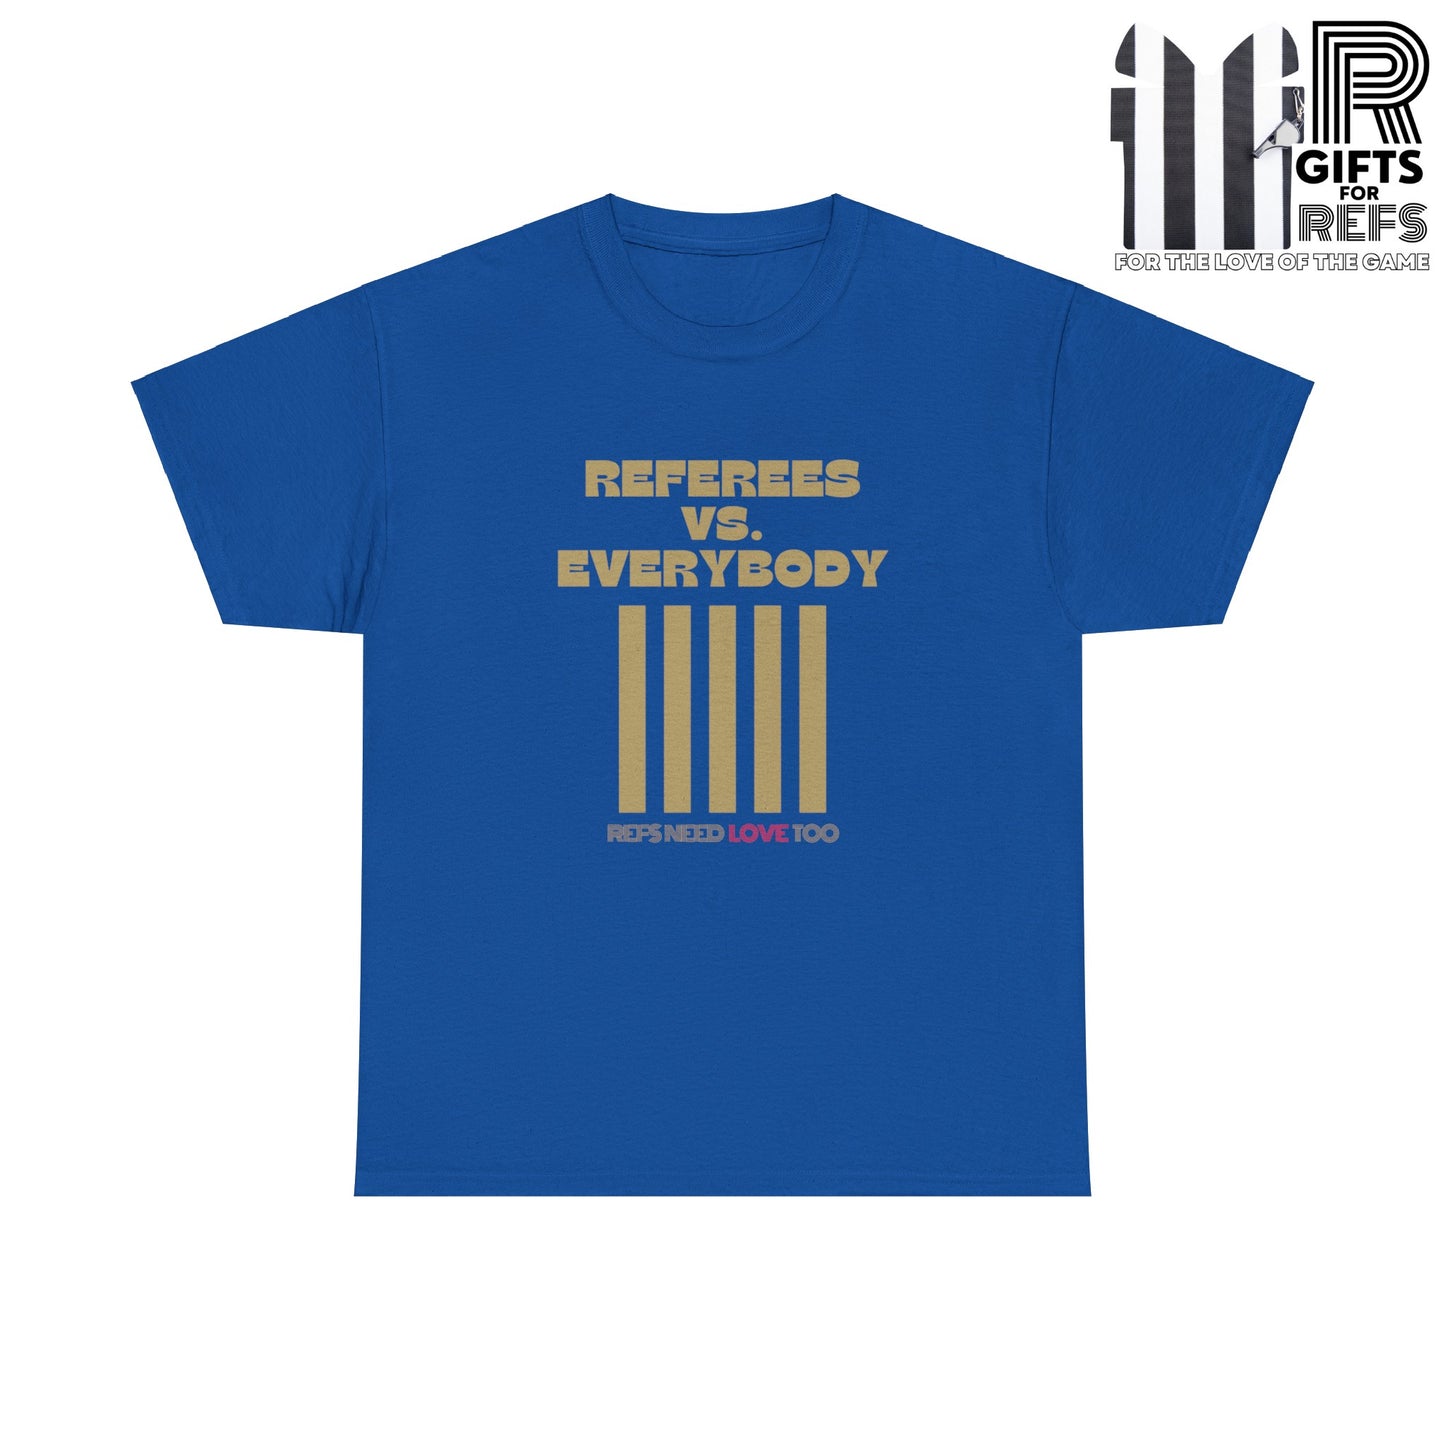 Referees vs. Everybody Cotton Tee | Gift For Refs | Screen printed shirt | Ref community | Referee family